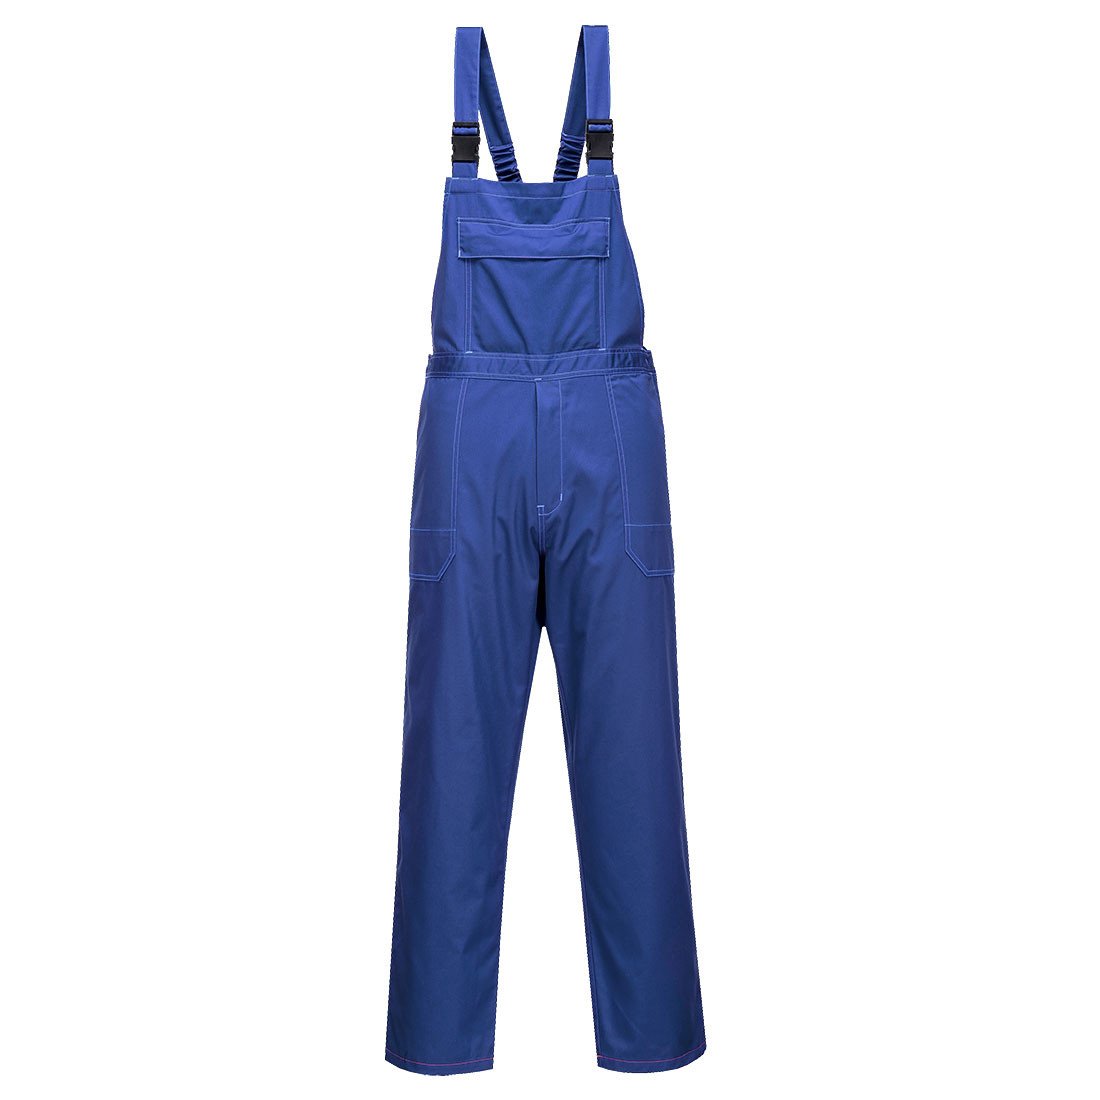 Portwest CR12 Chemical Resistant Bib Overall in Blue 